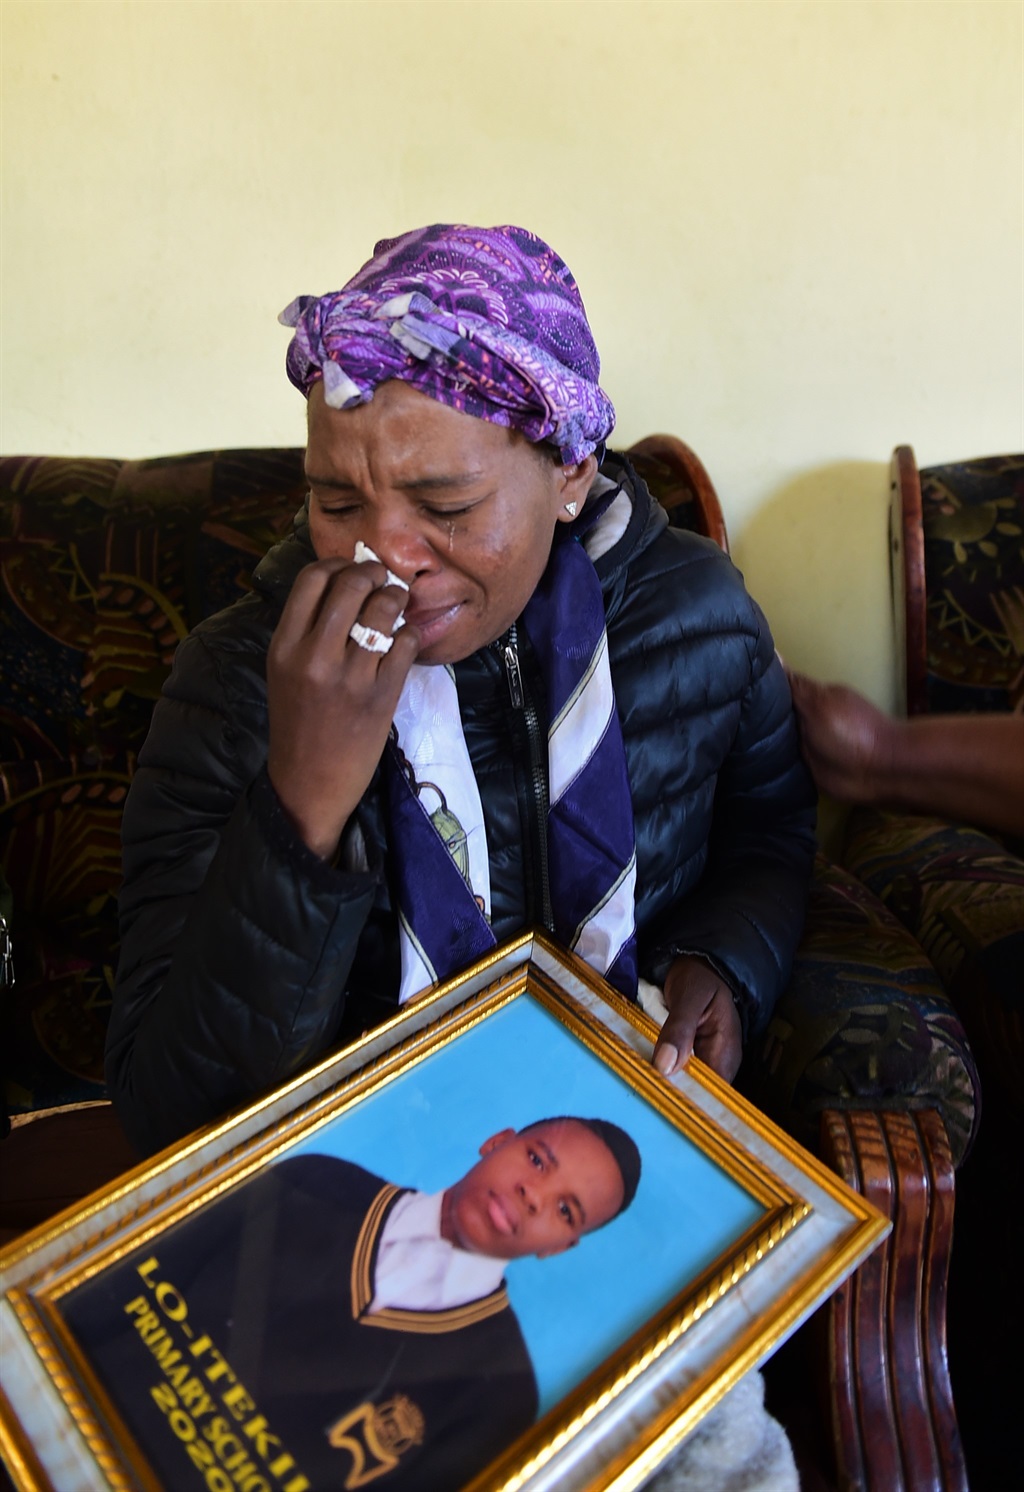 Dorah Kasibe could not hold back her tears as she recalled the state her son Kutlwano was in after being beaten by the community during a mob justice where he was accused of stealing a water tap. Photo by Morapedi Mashashe